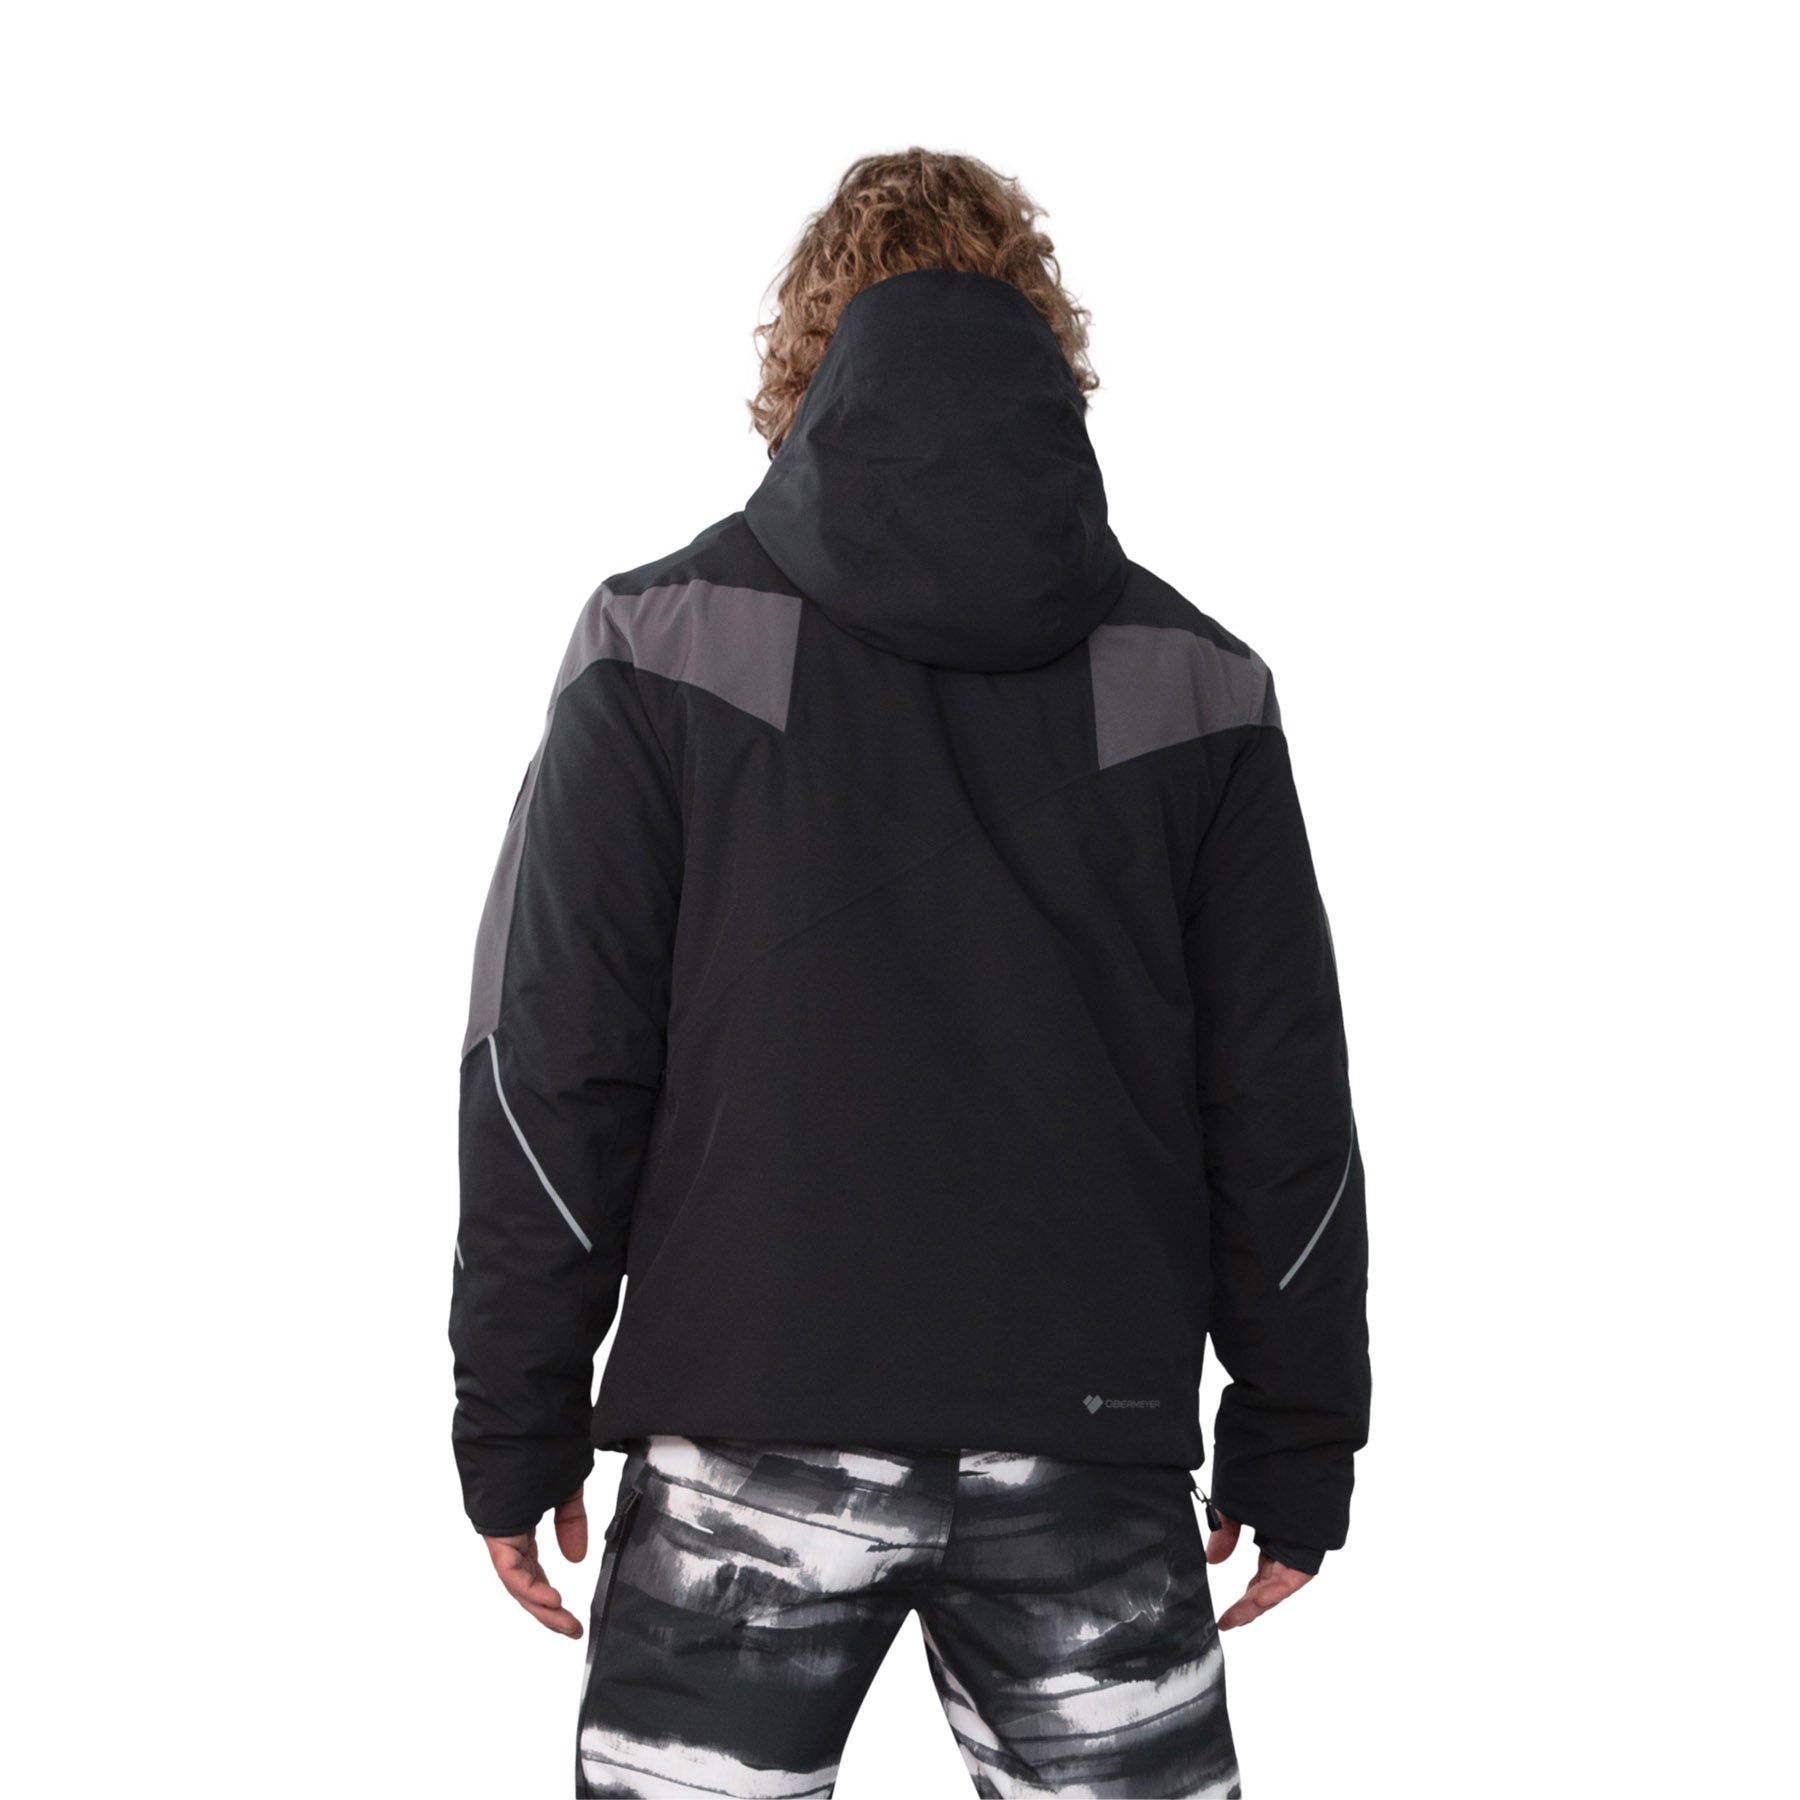 Image features the back of a male model wearing the Obermeyer Charger Jacket in black with grey accents across the back of the shoulders.